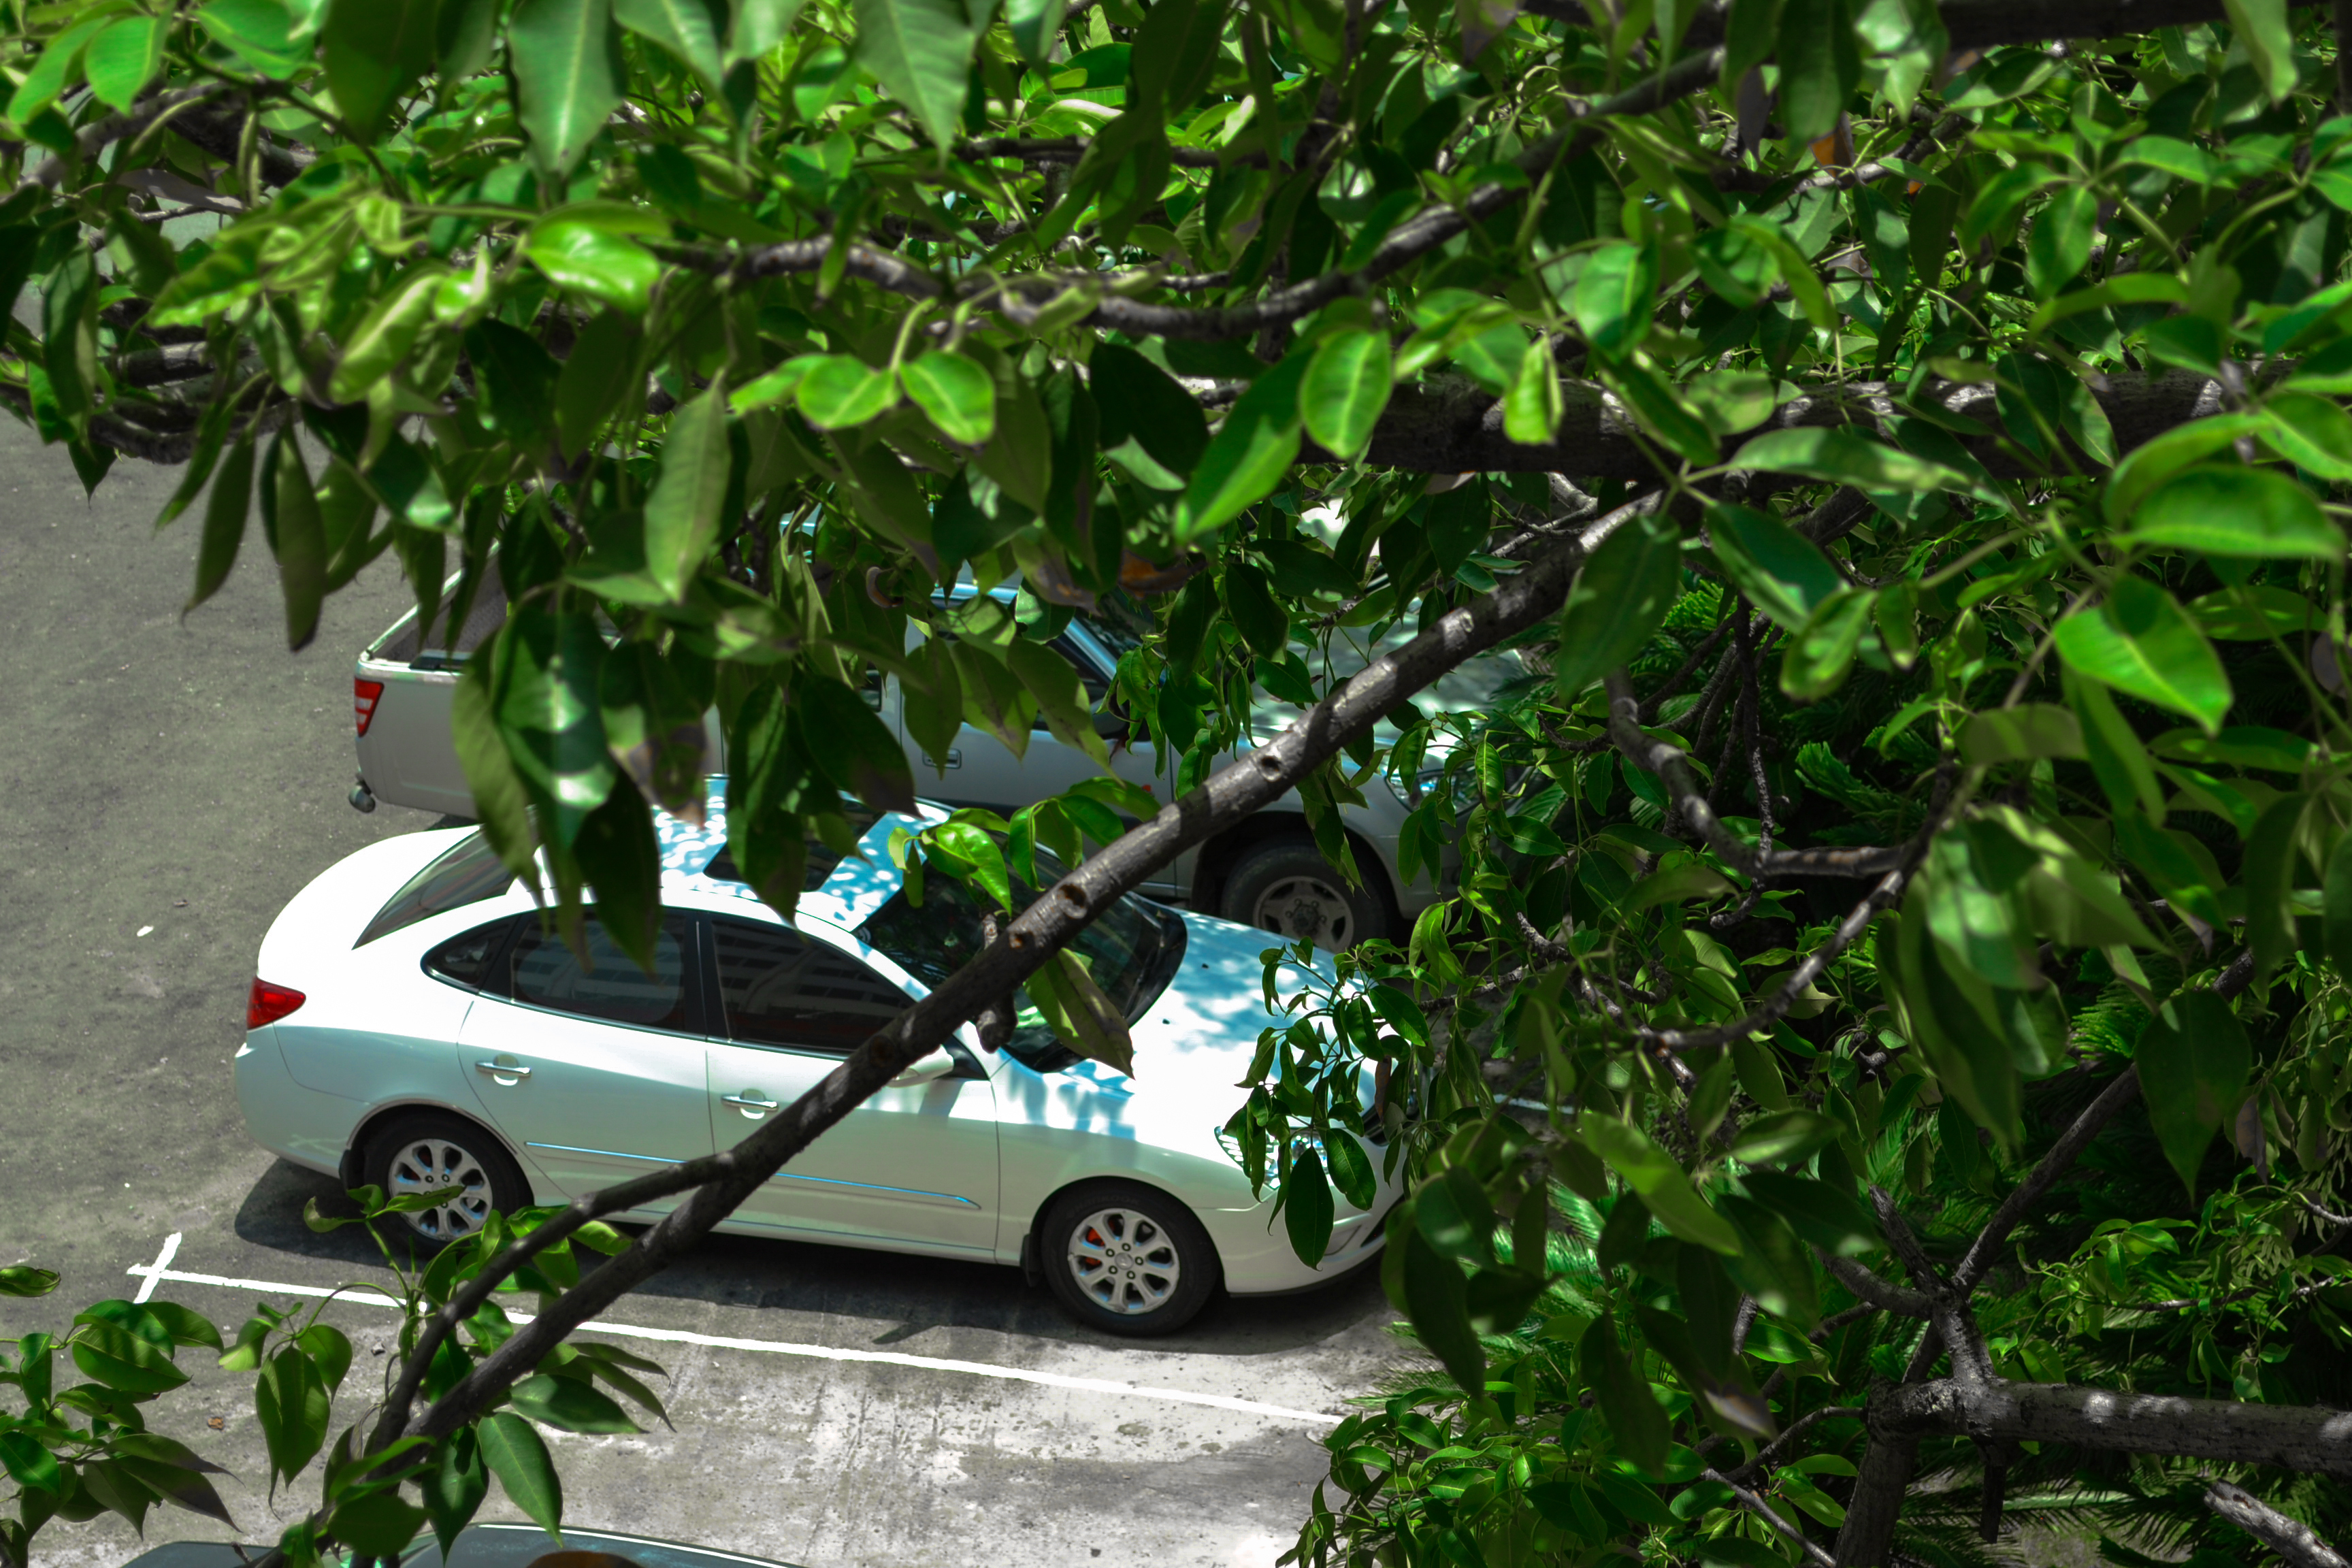 Be cautious of trees during a hailstorm. Their branches can fall on your car, causing extra damage.